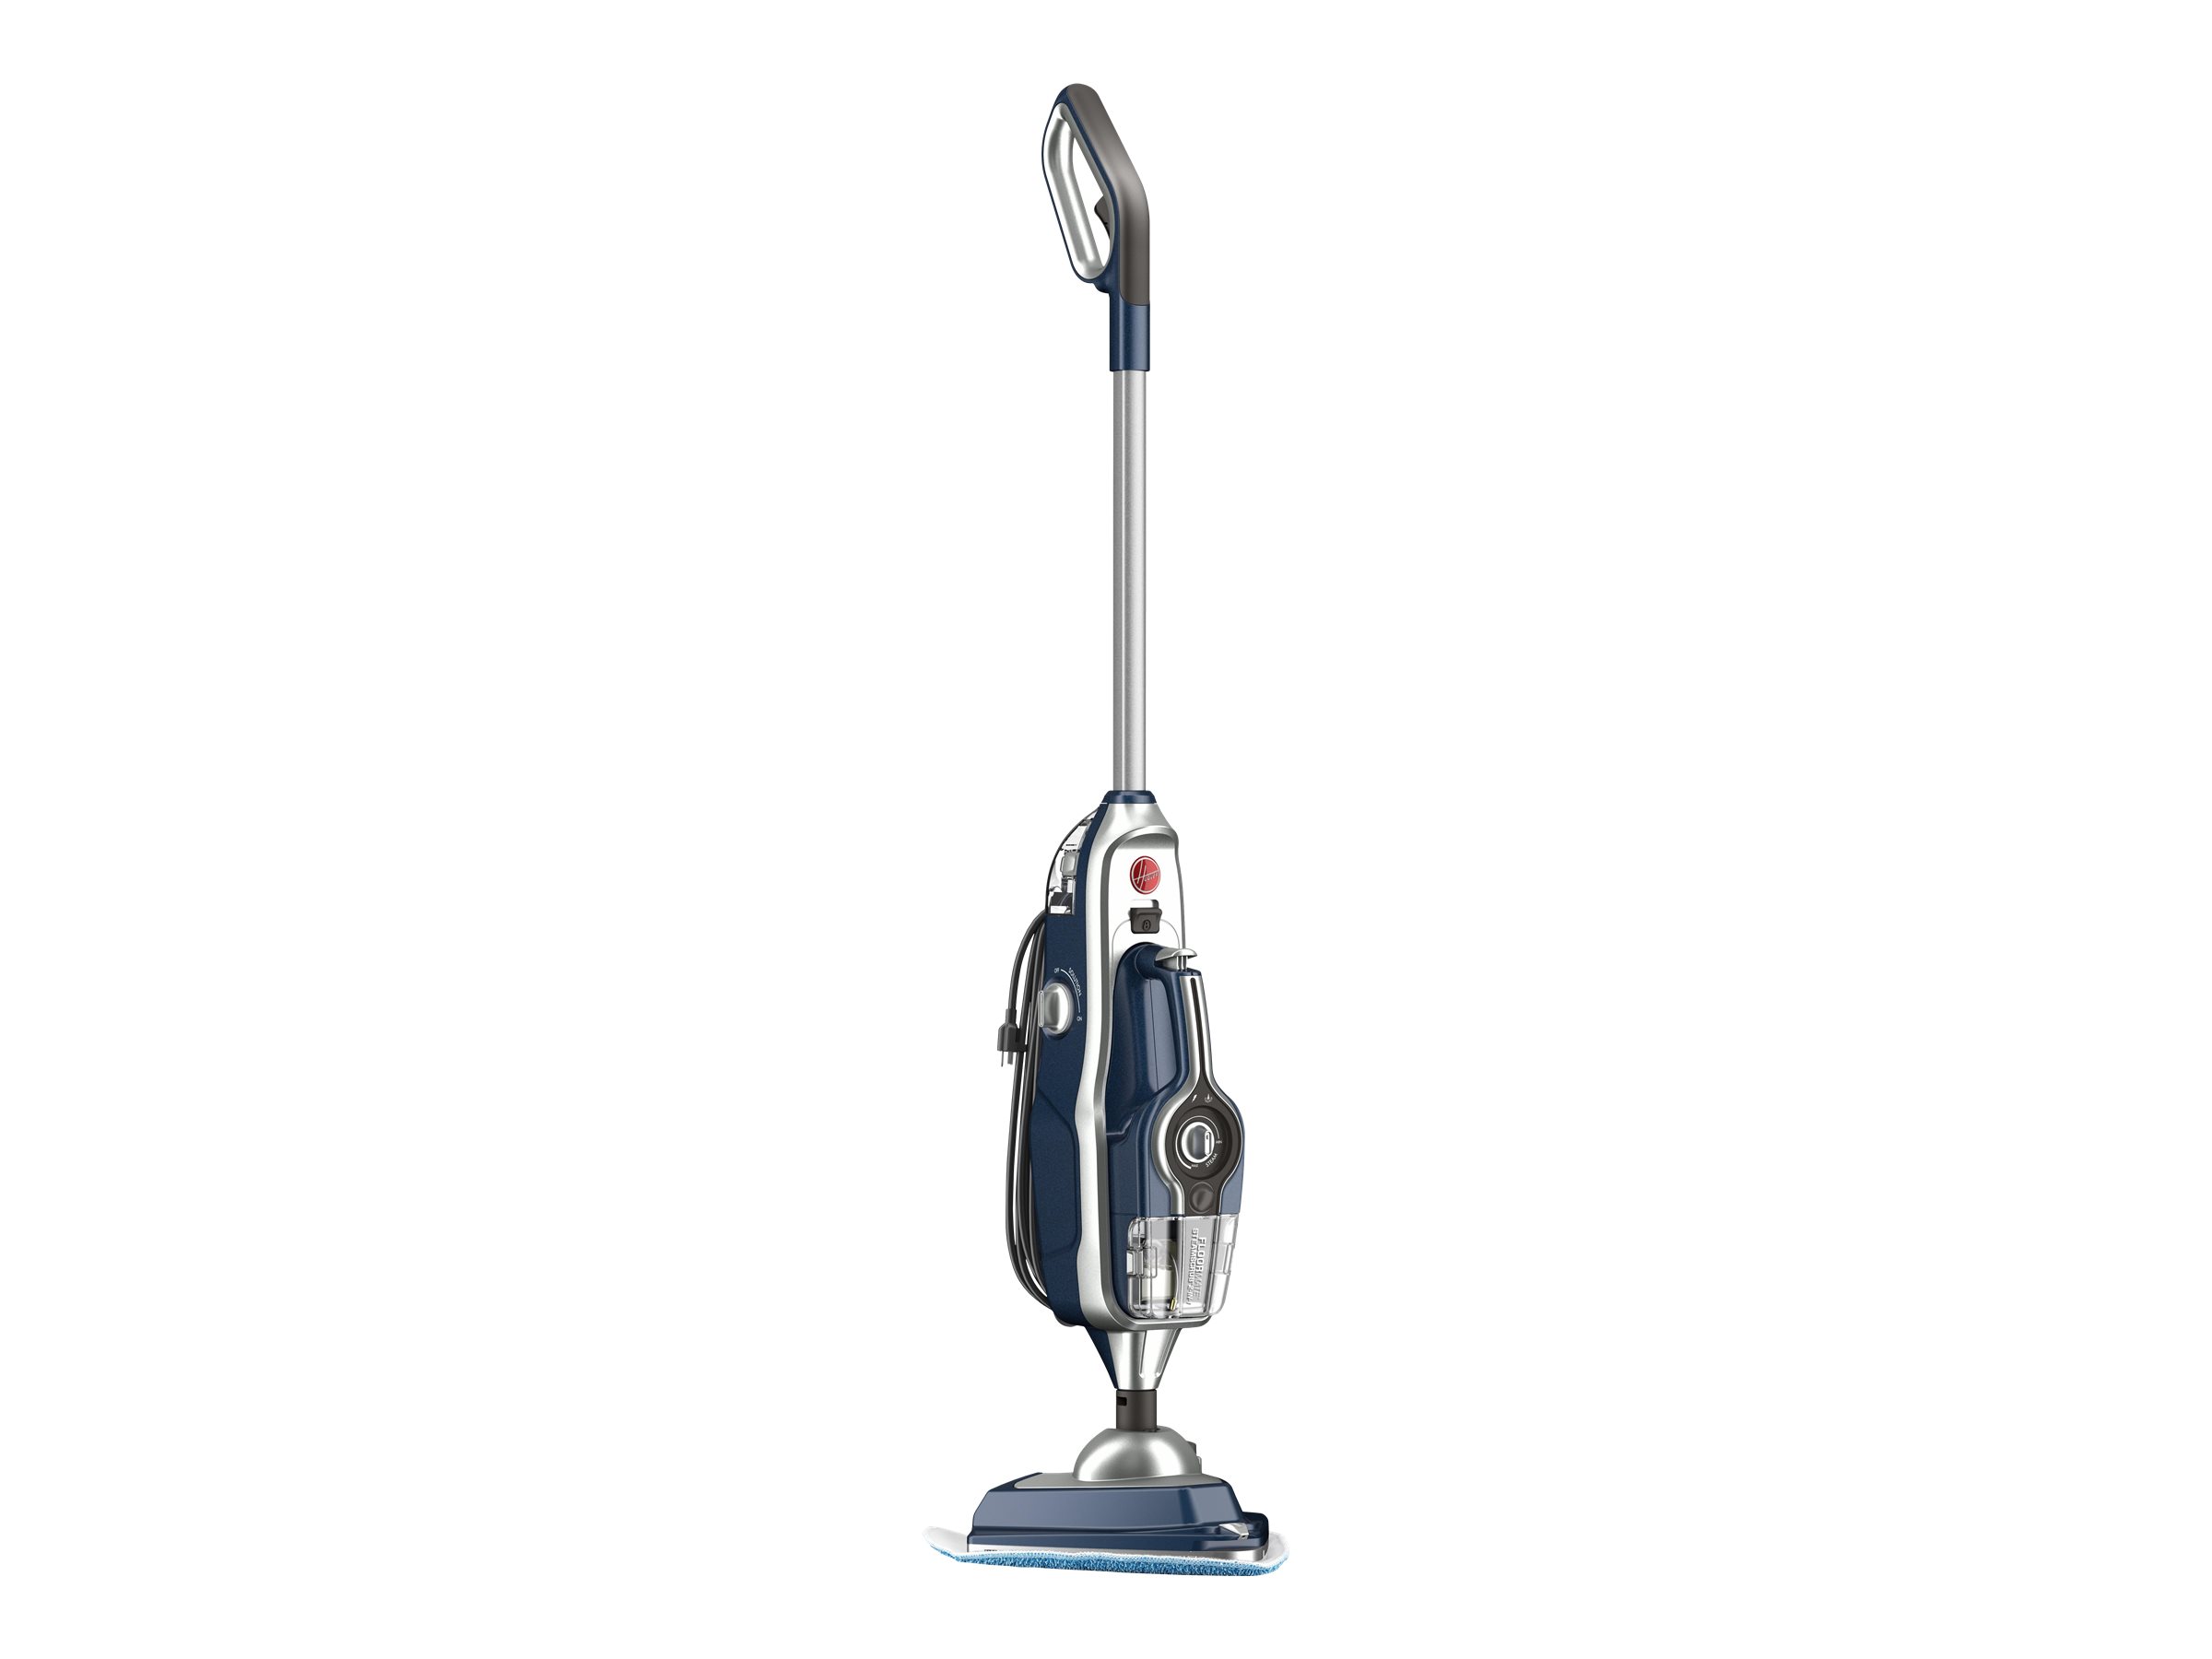 Hoover FloorMate SteamScrub WH20445 2-in-1 - Steam cleaner - stick - image 3 of 8